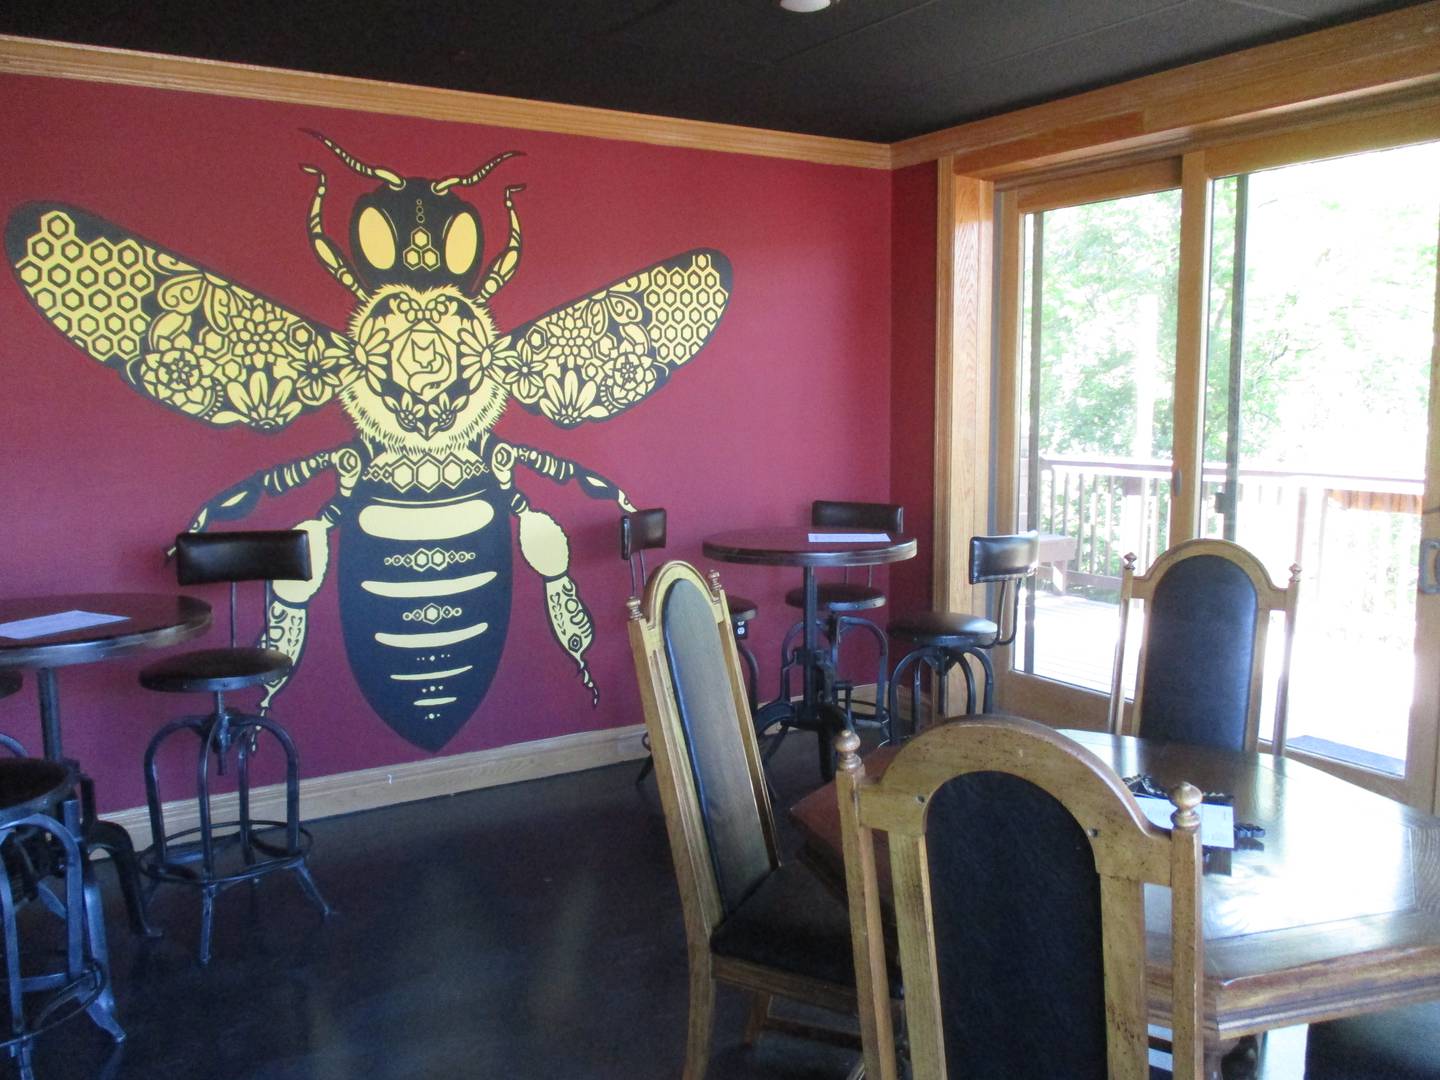 The Bee Room at Yorkville's new Foxes Den Meadery is a cozy place to gather over a drink. It leads to an outdoor deck overlooking the Fox River.